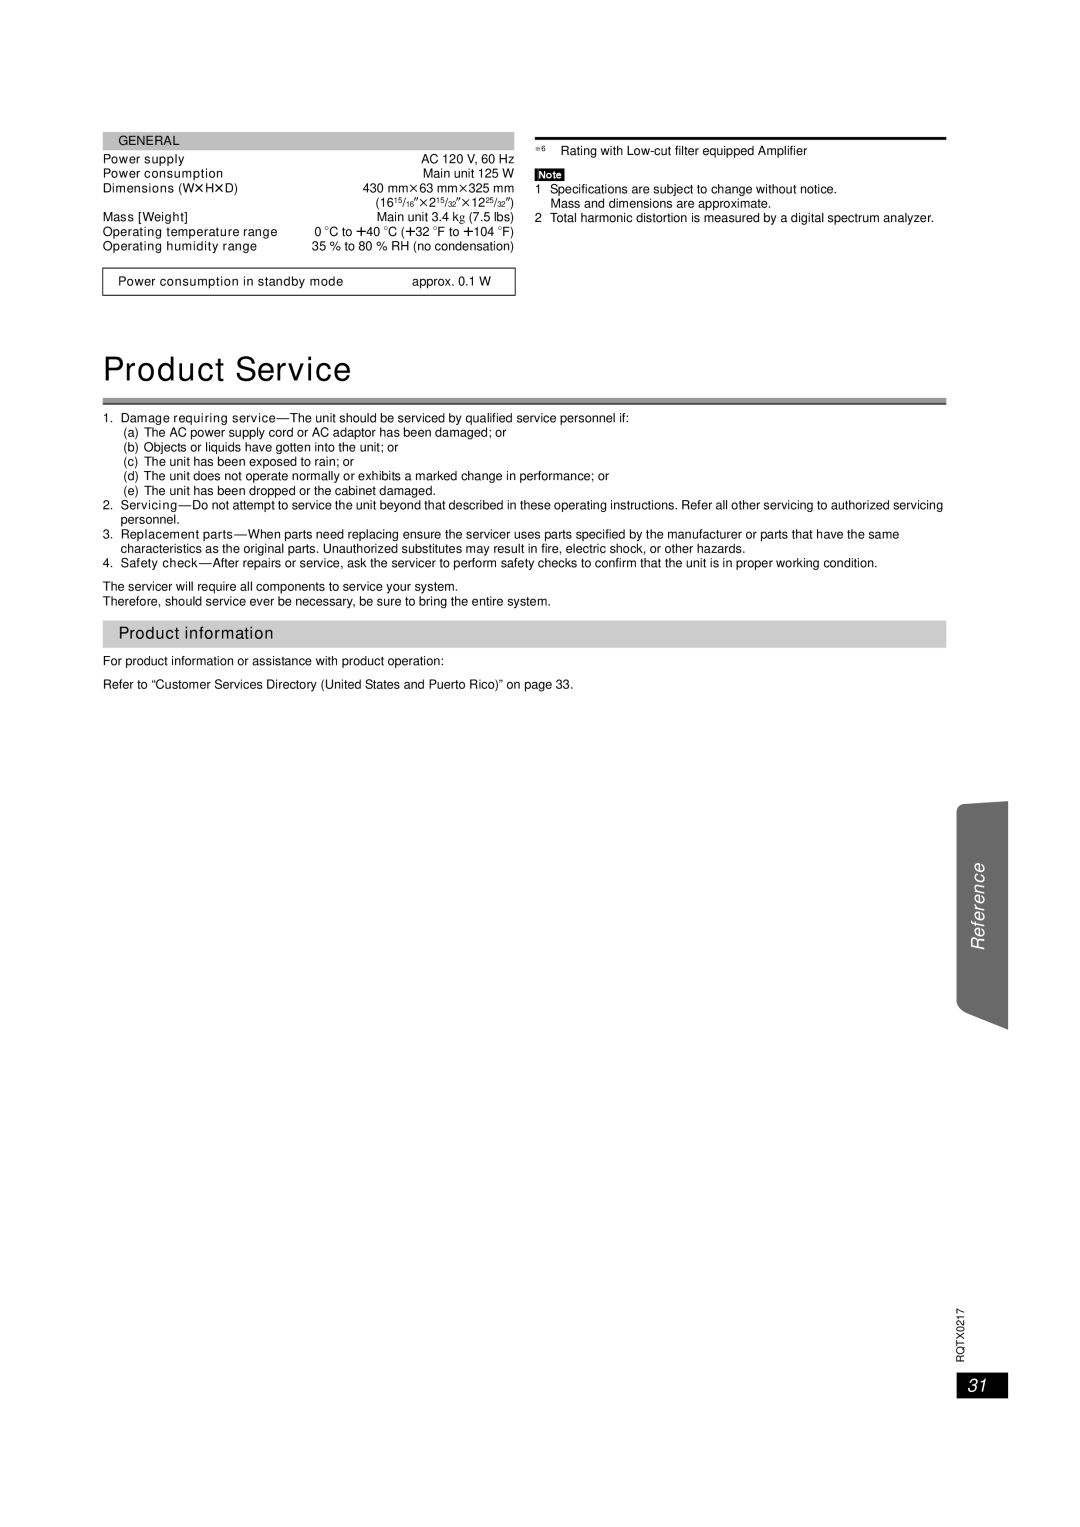 Panasonic SC-PT464 manual Product Service, Getting Started, Playing Discs, Other Operations Reference, Product information 